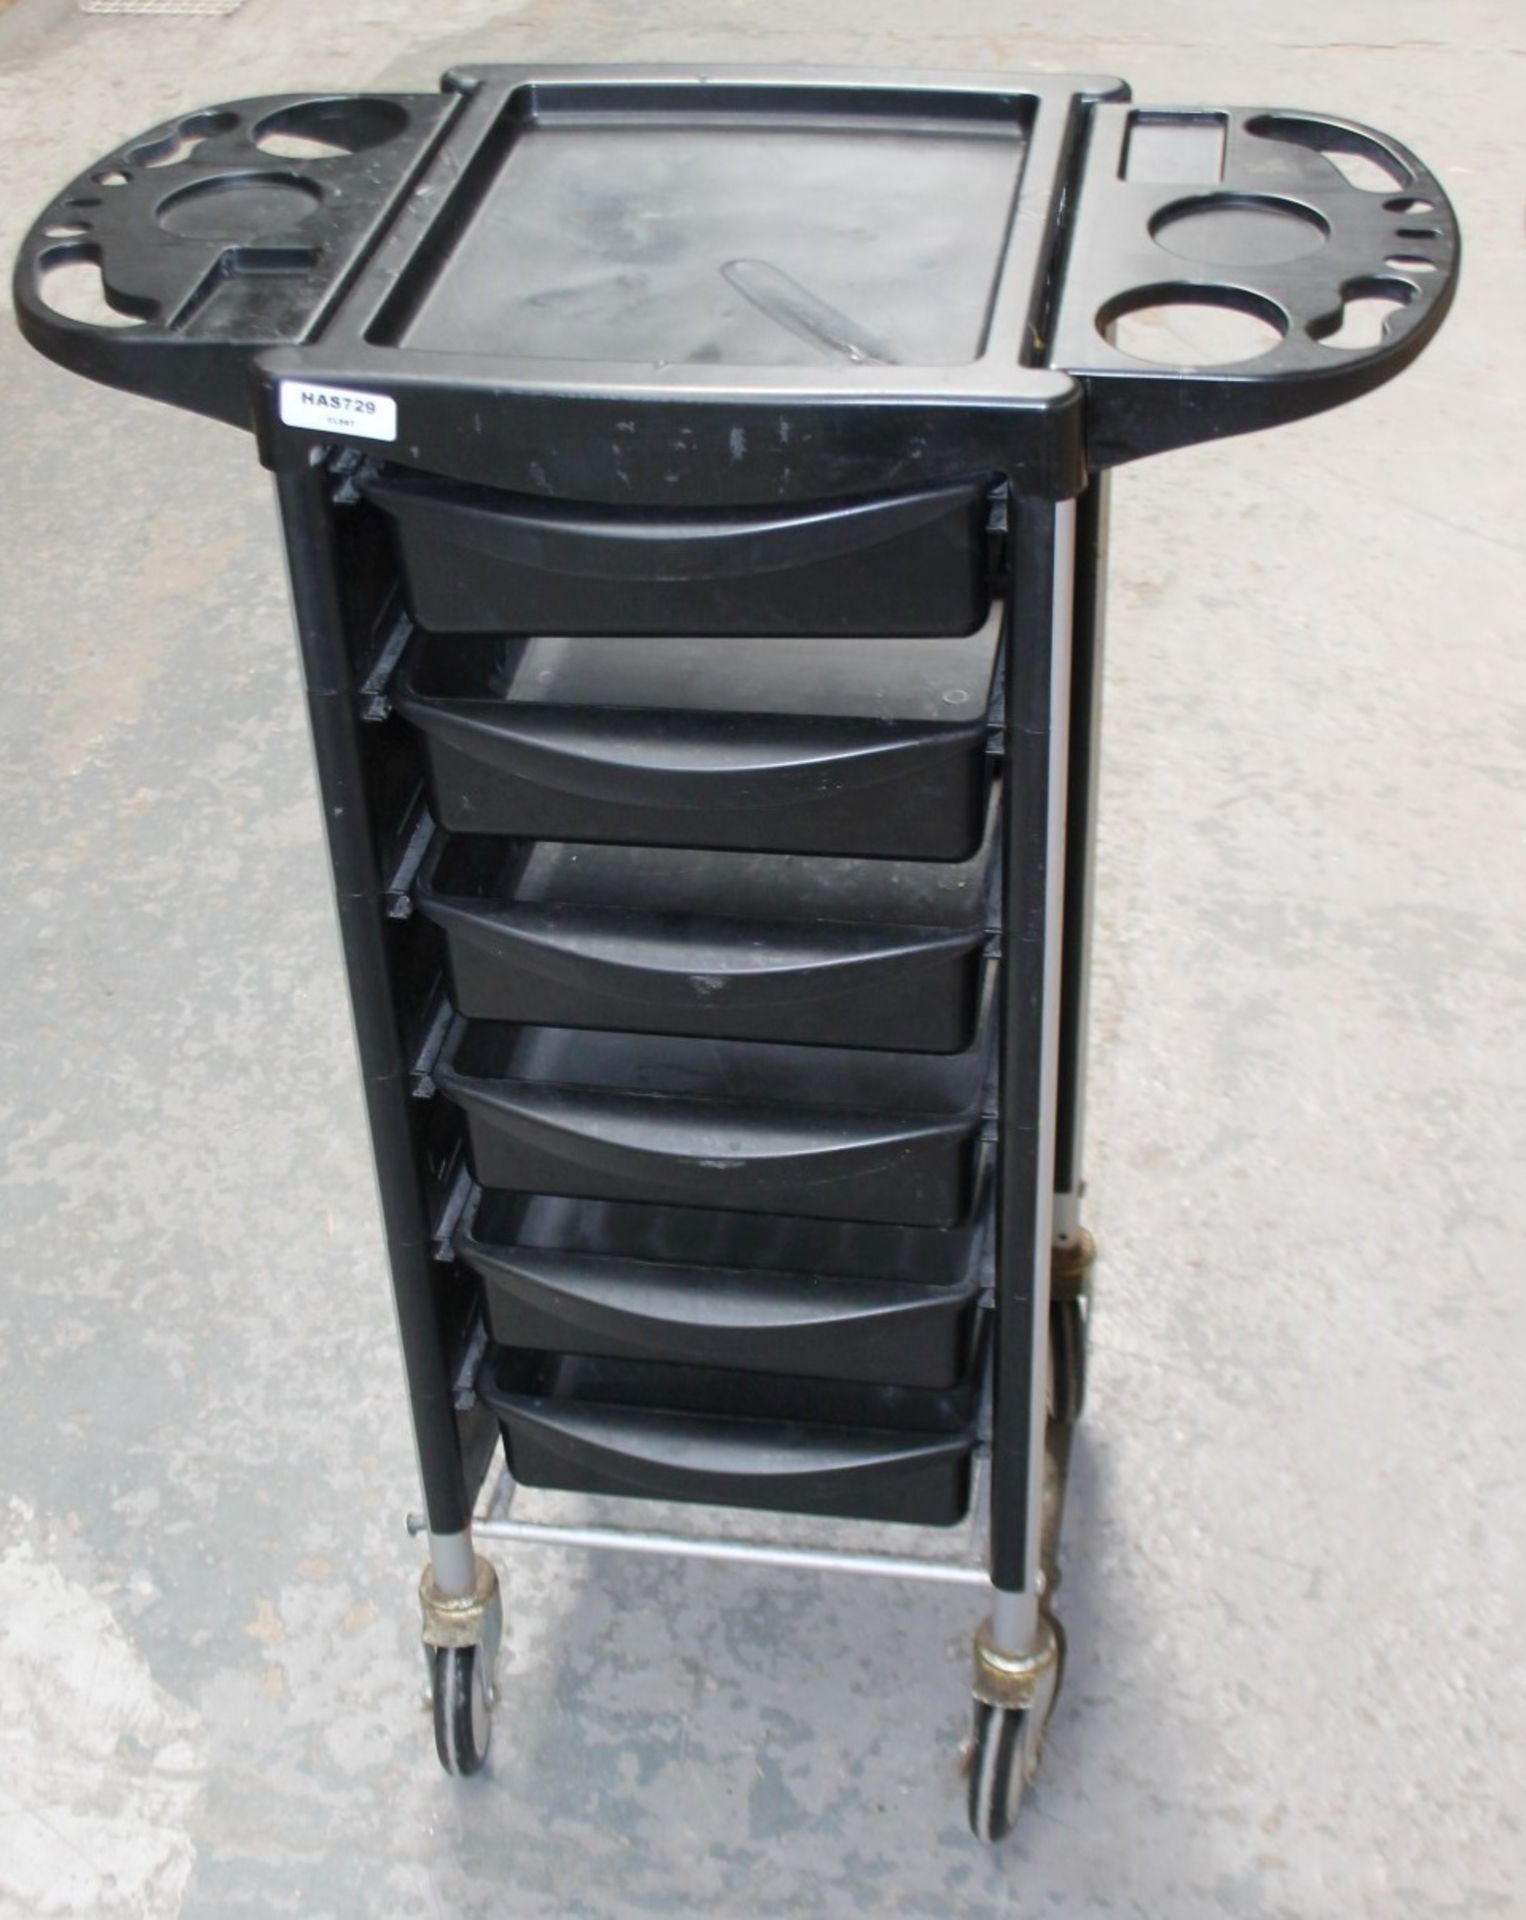 4 x Items Of Salon Furniture Including A Pair Of Stylists Trolleys, Table and Stool  - Recently - Image 11 of 11